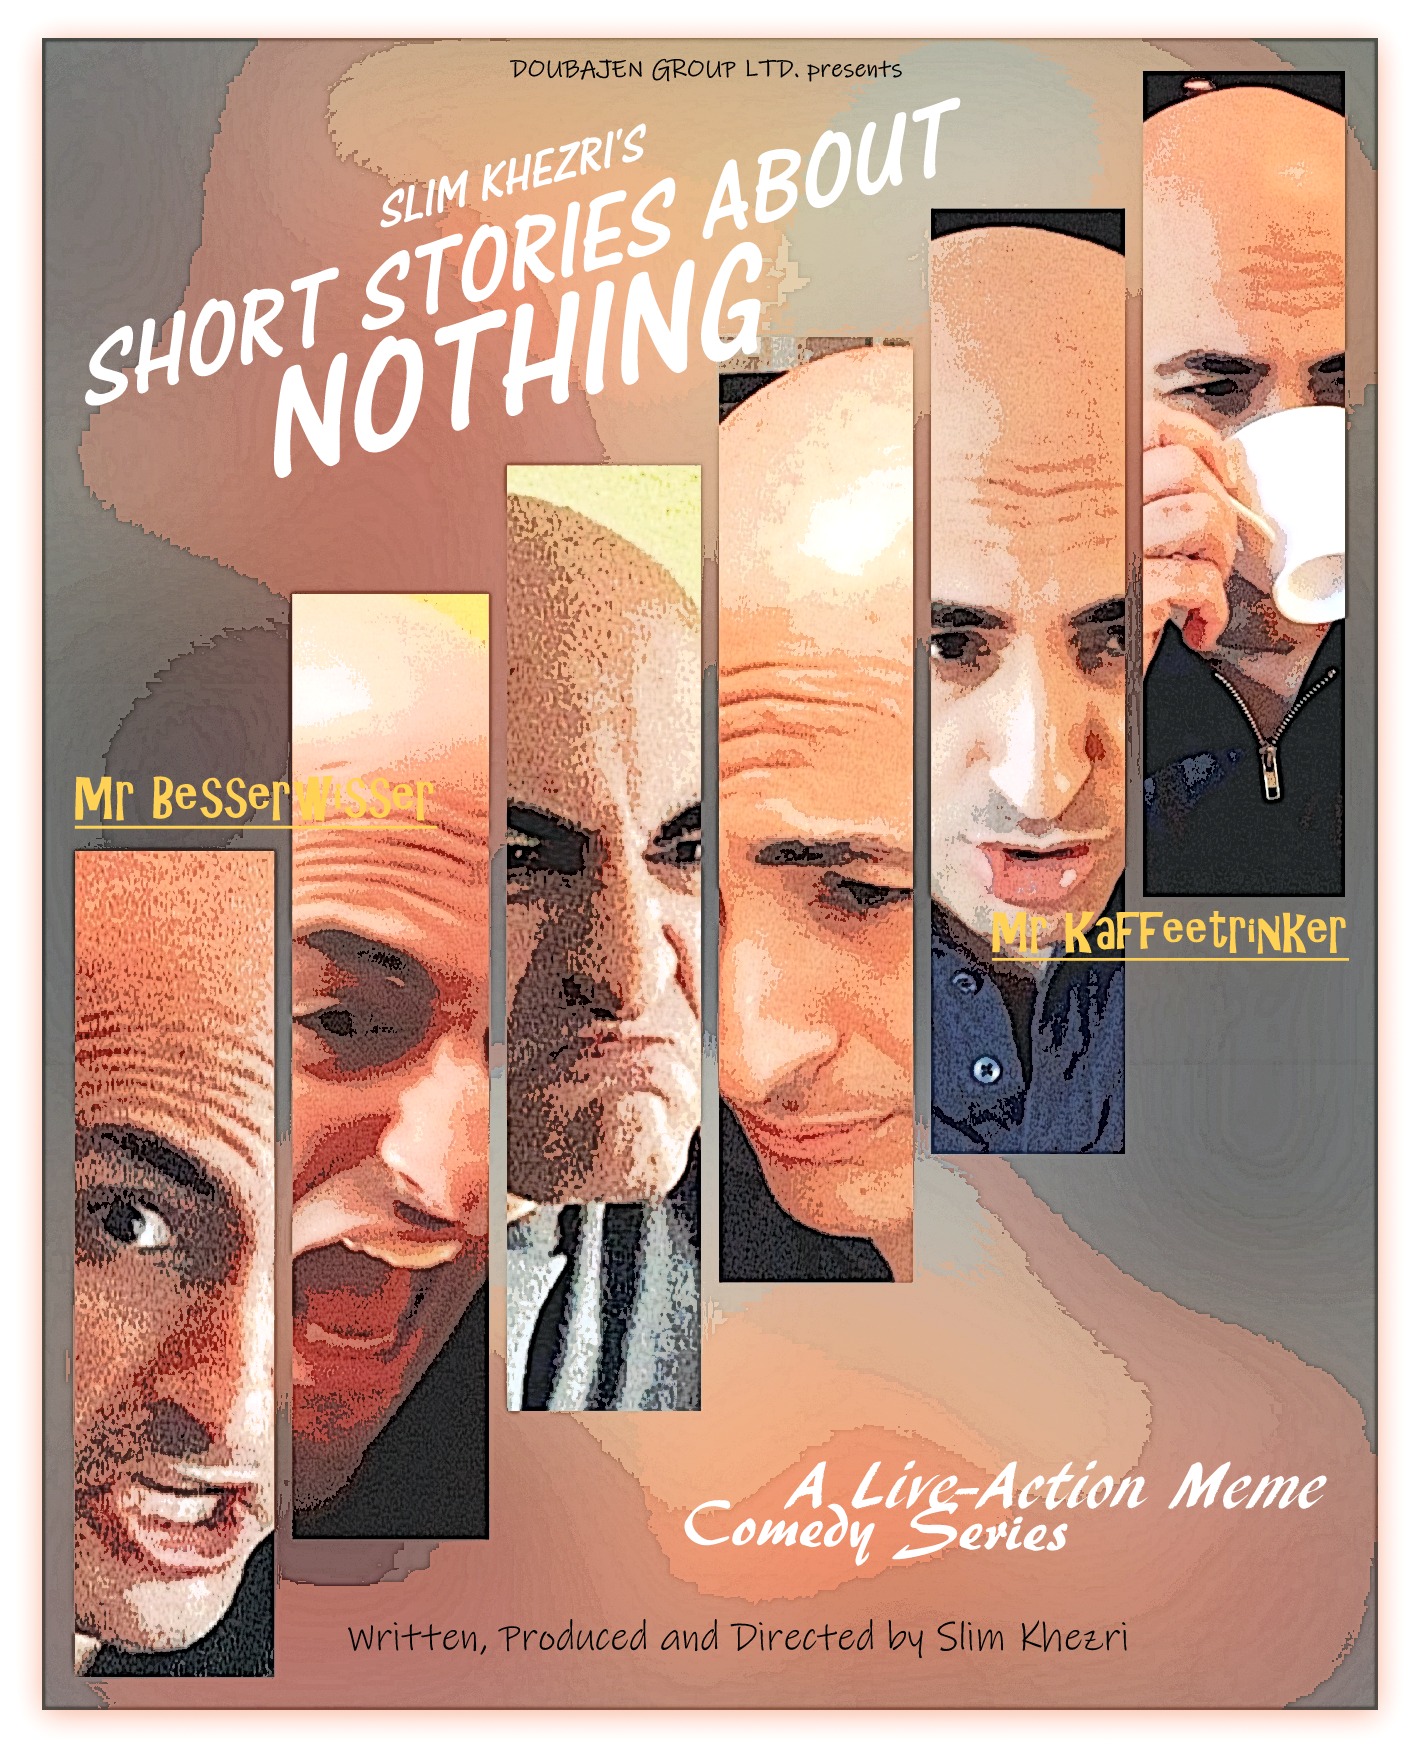 Short Stories About Nothing